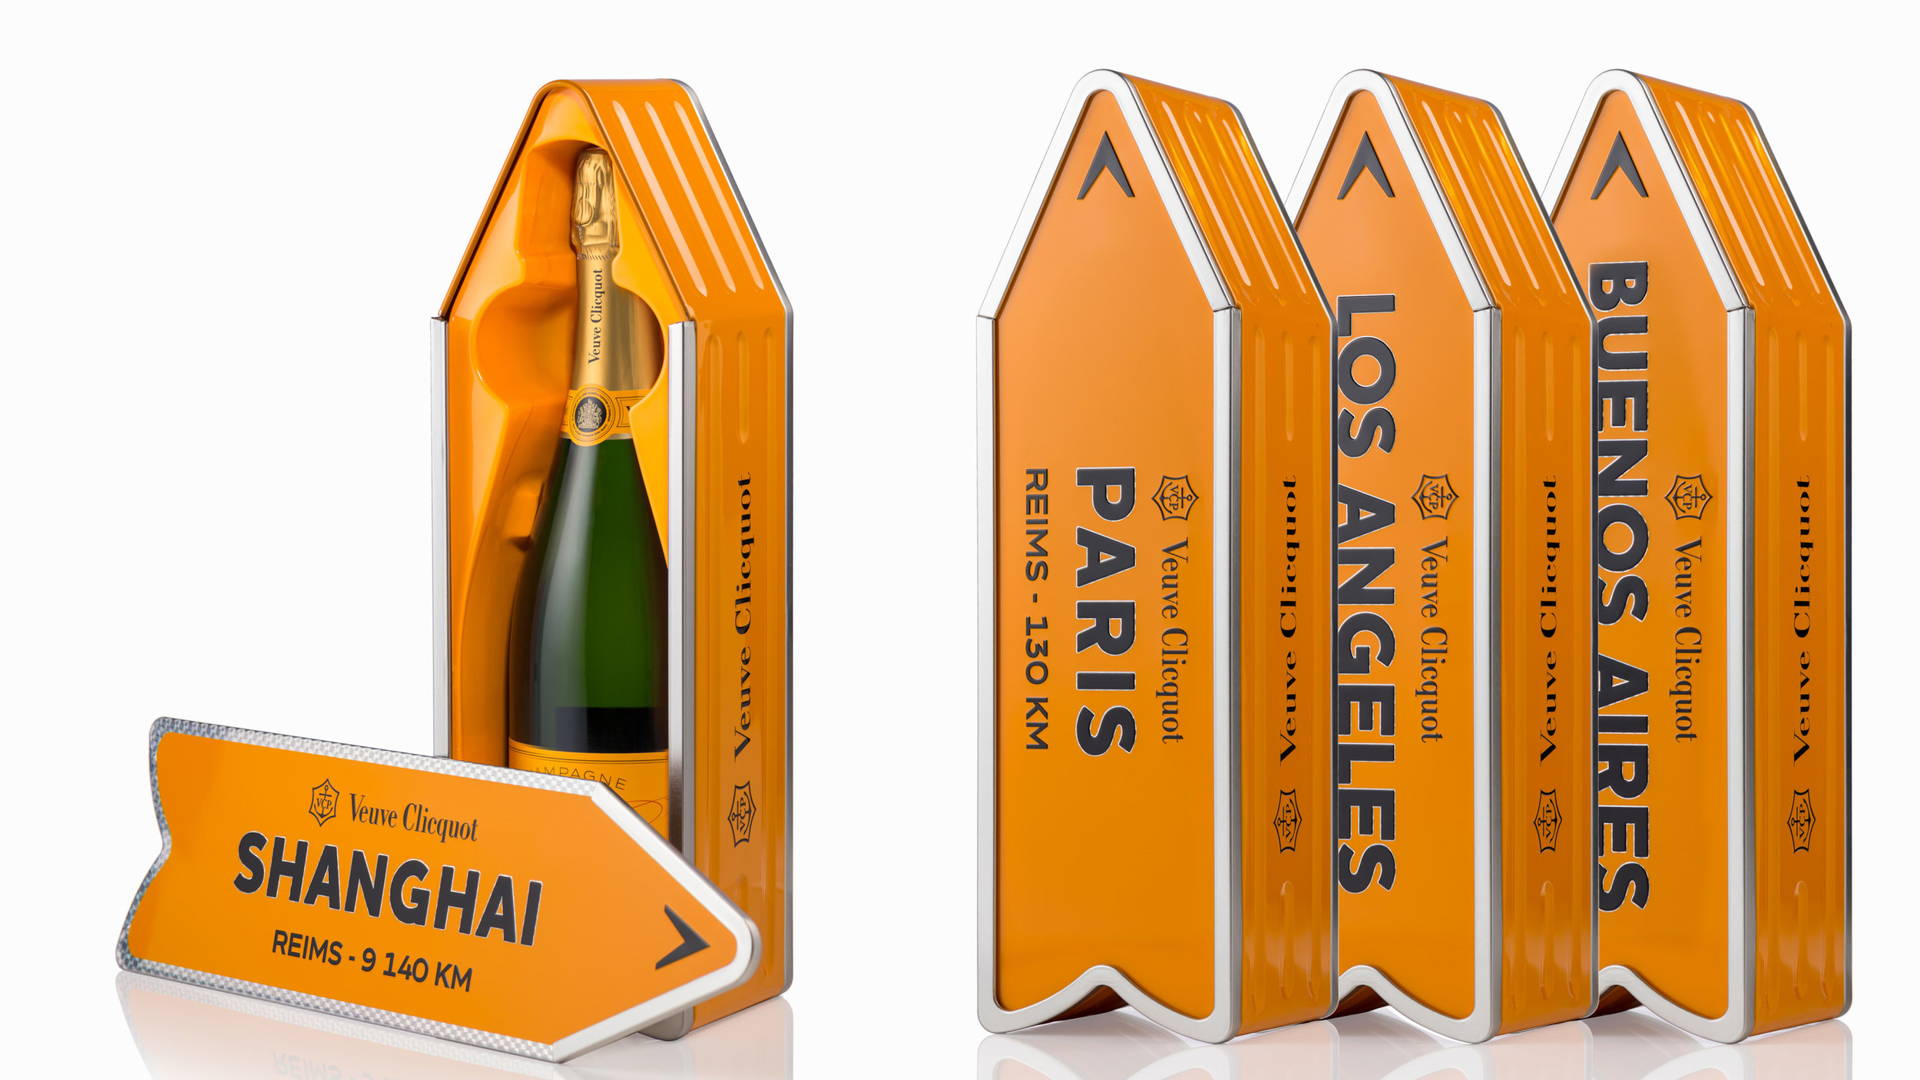 Check Out The Beautiful Packaging for Clicquot Arrow